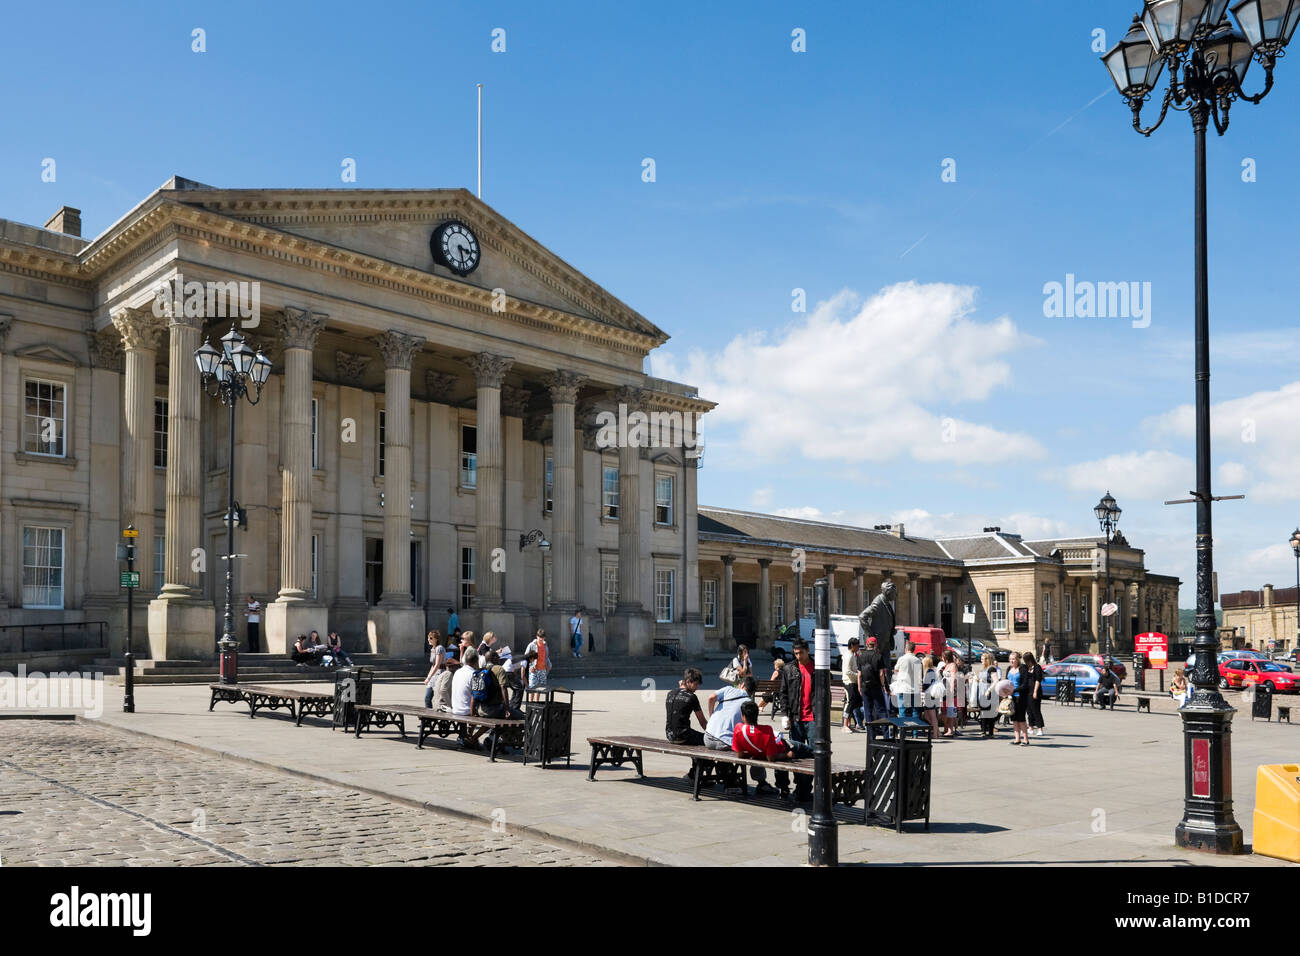 The railway station, St George's Square, Huddersfield, West Yorkshire, England, United Kingdom Stock Photo